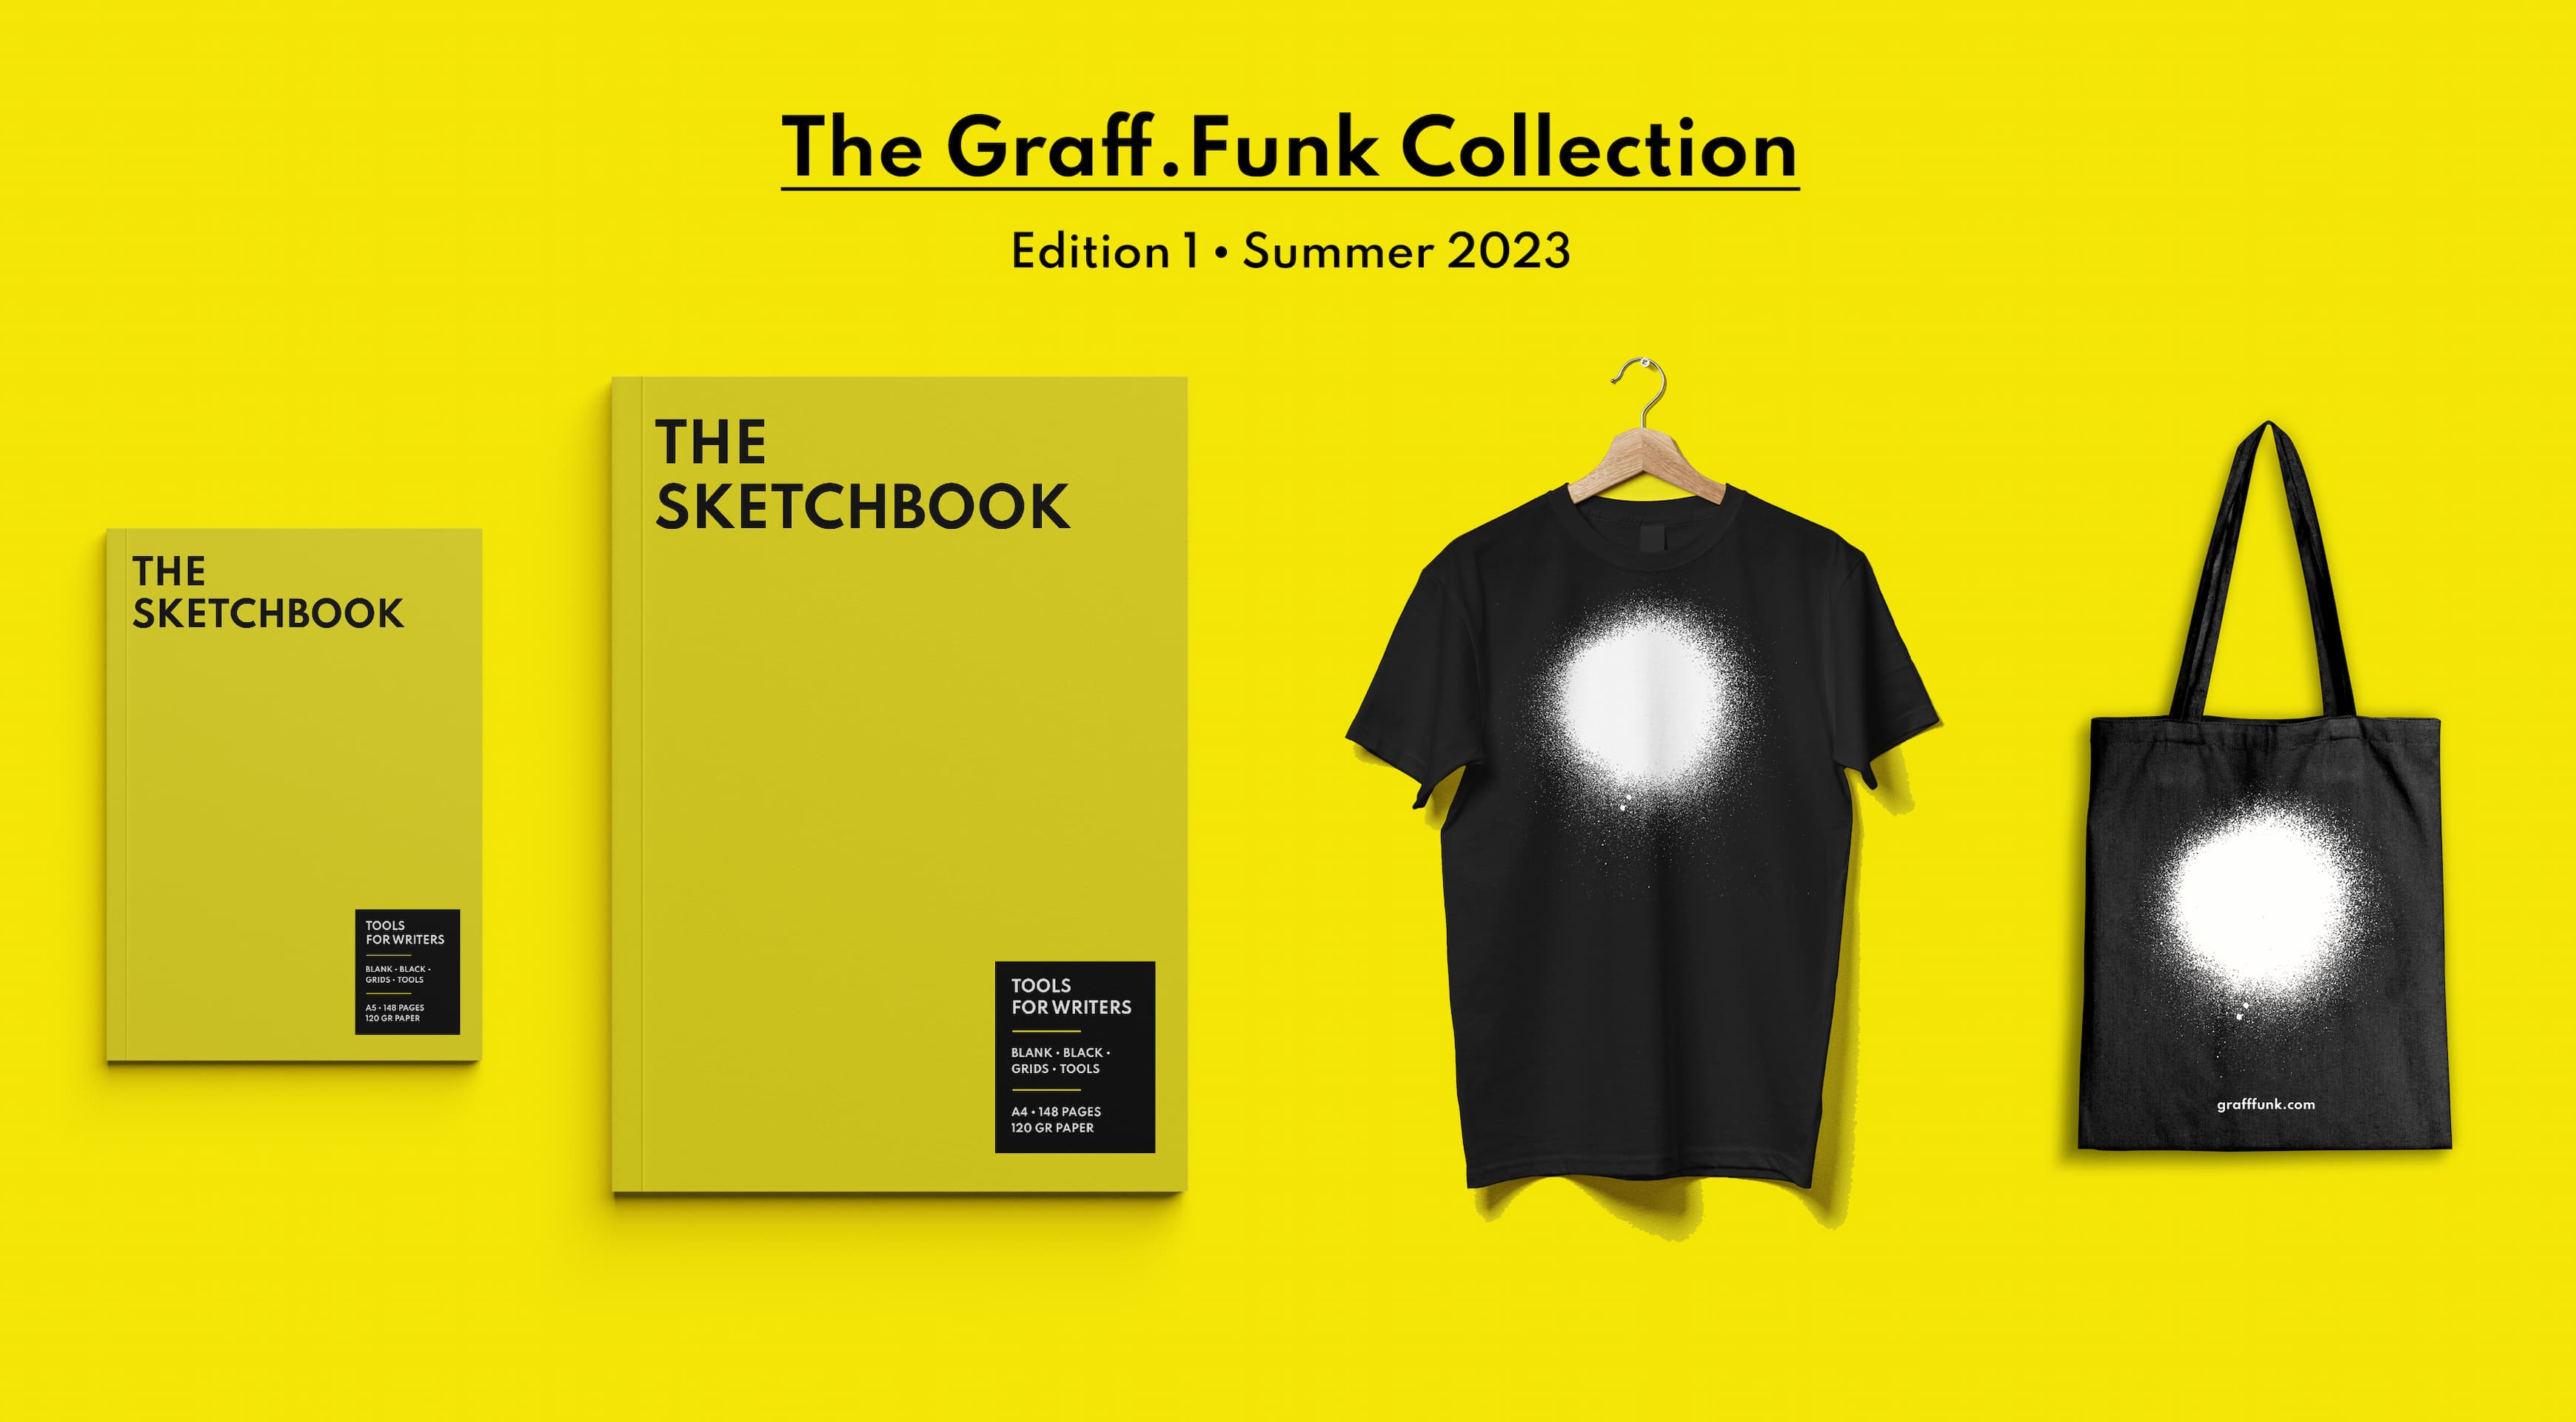 The Graff.Funk collection: Sketchbook, T-Shirt and bag